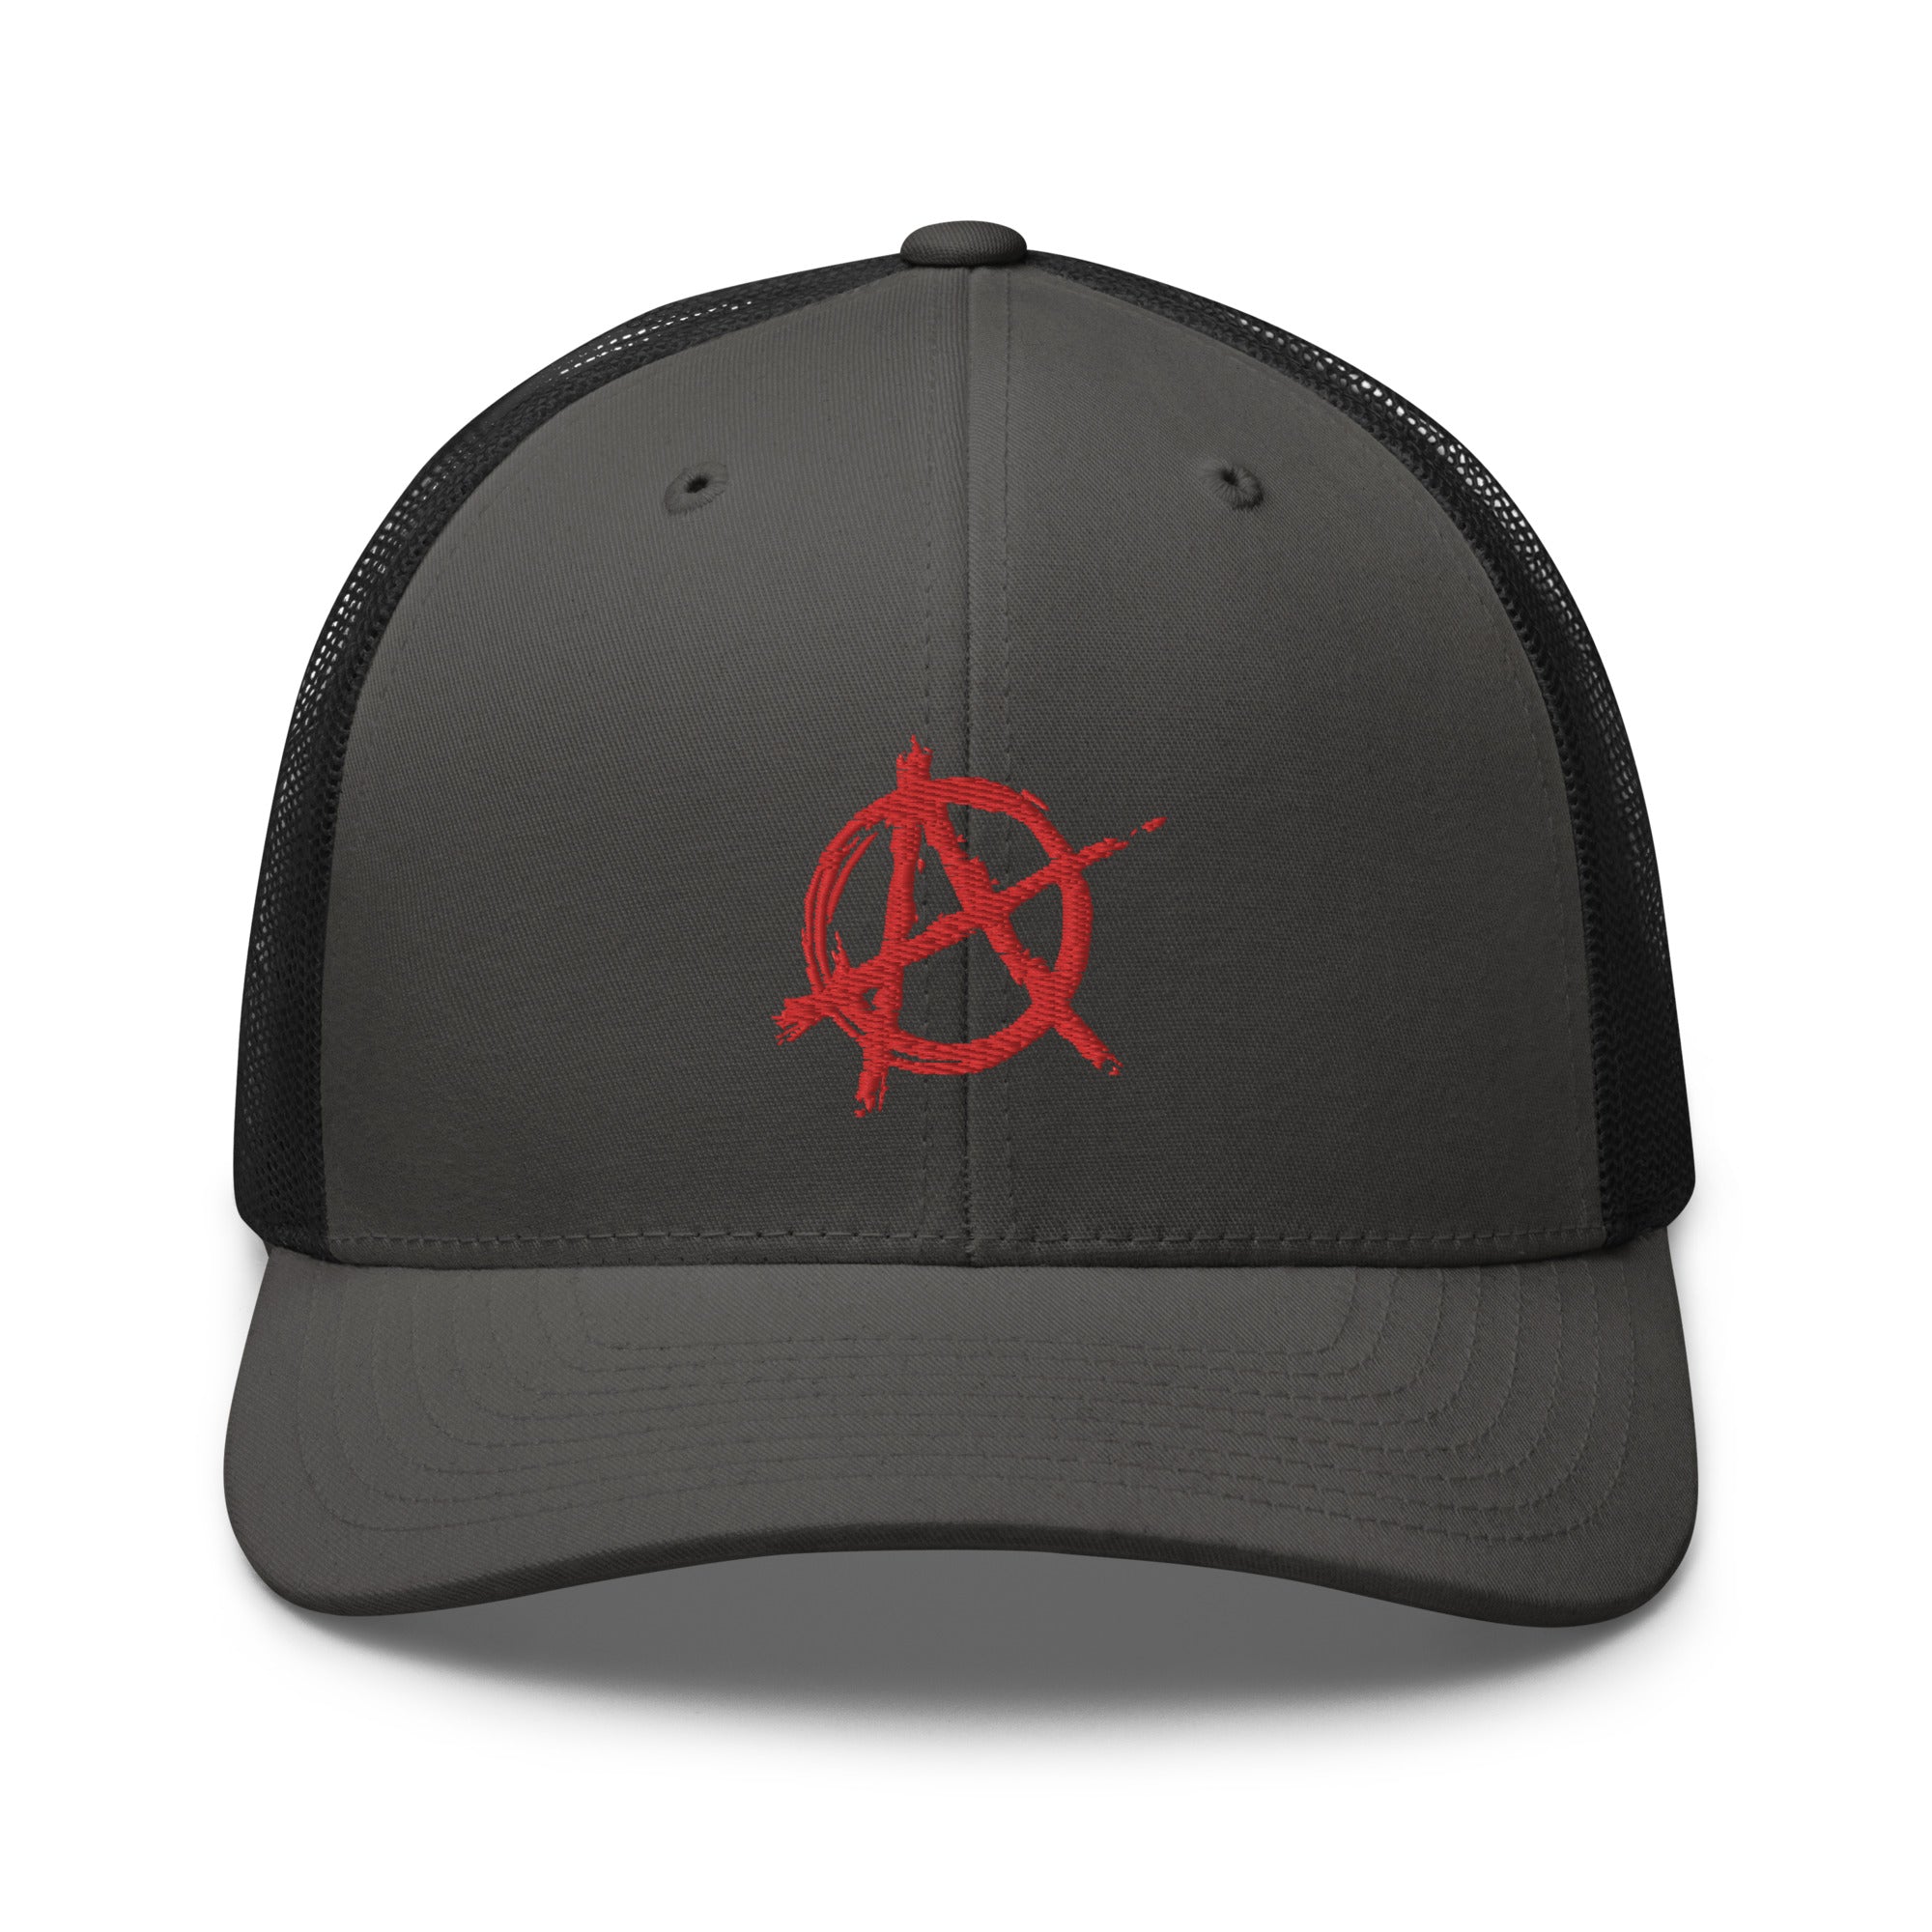 Red Anarchy Sign Punk Rock Chaos Embroidered Retro Trucker Cap Snapback Hat